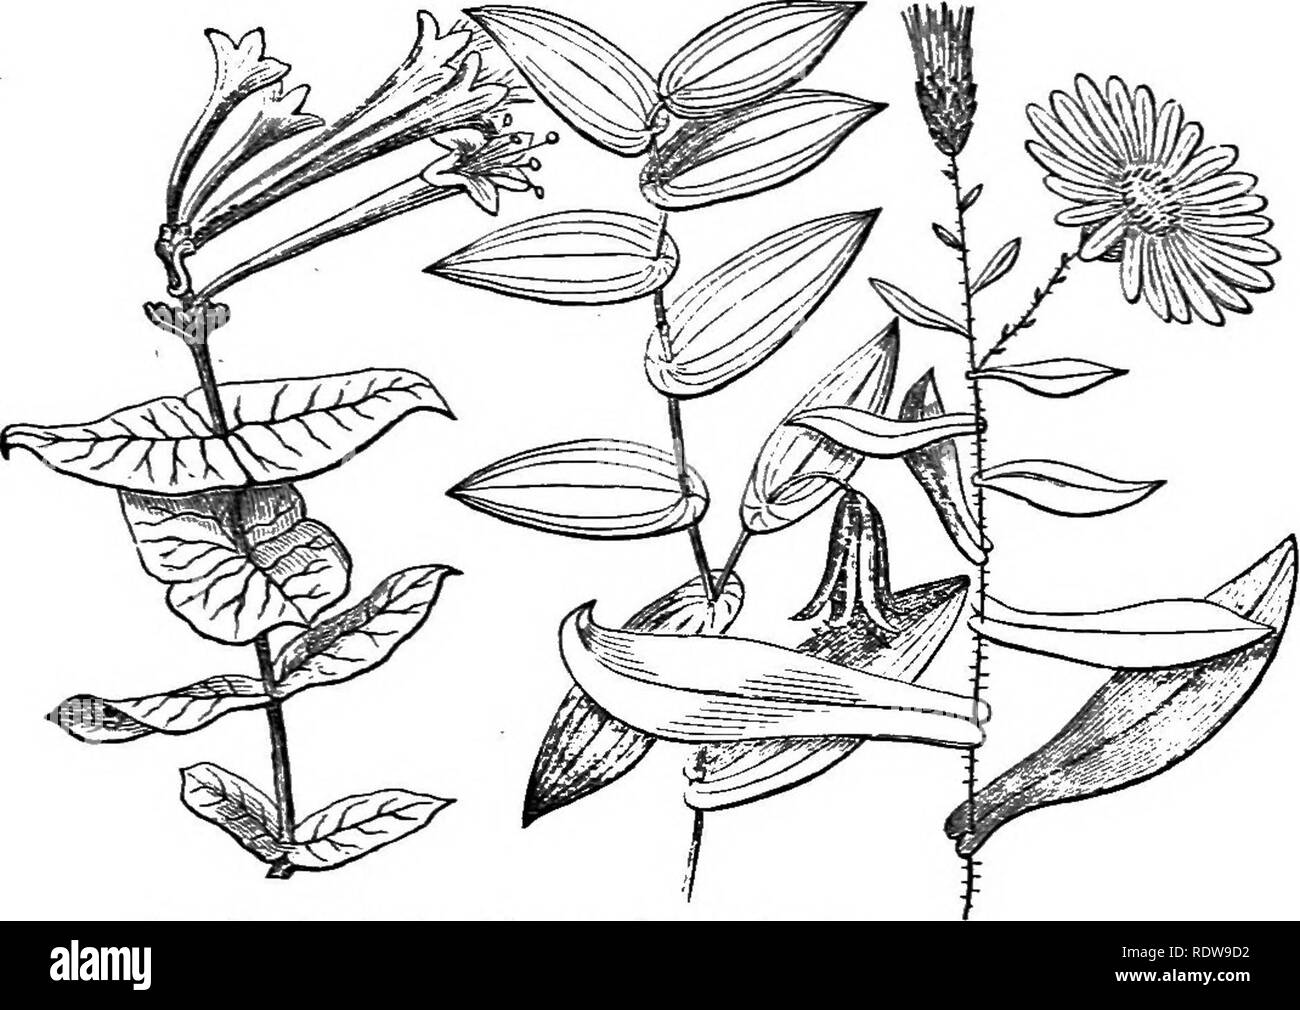 . Leaves and flowers : or, Object lessons in botany with a flora : prepared for beginners in academies and public schools . Botany. FORMS OF THE PETIOLK 33. Fig. 80. AmplexicanI leaves of Aster laevia. Fig. 81. Perfoliate leaves of Bellwort ( Uvularia.perfoliata). Fig. 82. Connate leaves of Honeysuckle {Lonicera sempersirens). 43. In Fig. 82 (Trumpet Honeysuckle) the leaves placed opposite are joined together by pairs, base to base. Such are connate leaves. 44. The forms of the petiole, when the petiole exists, are also various. Generally, it is merely a rounded, slender stem, but you will oft Stock Photo